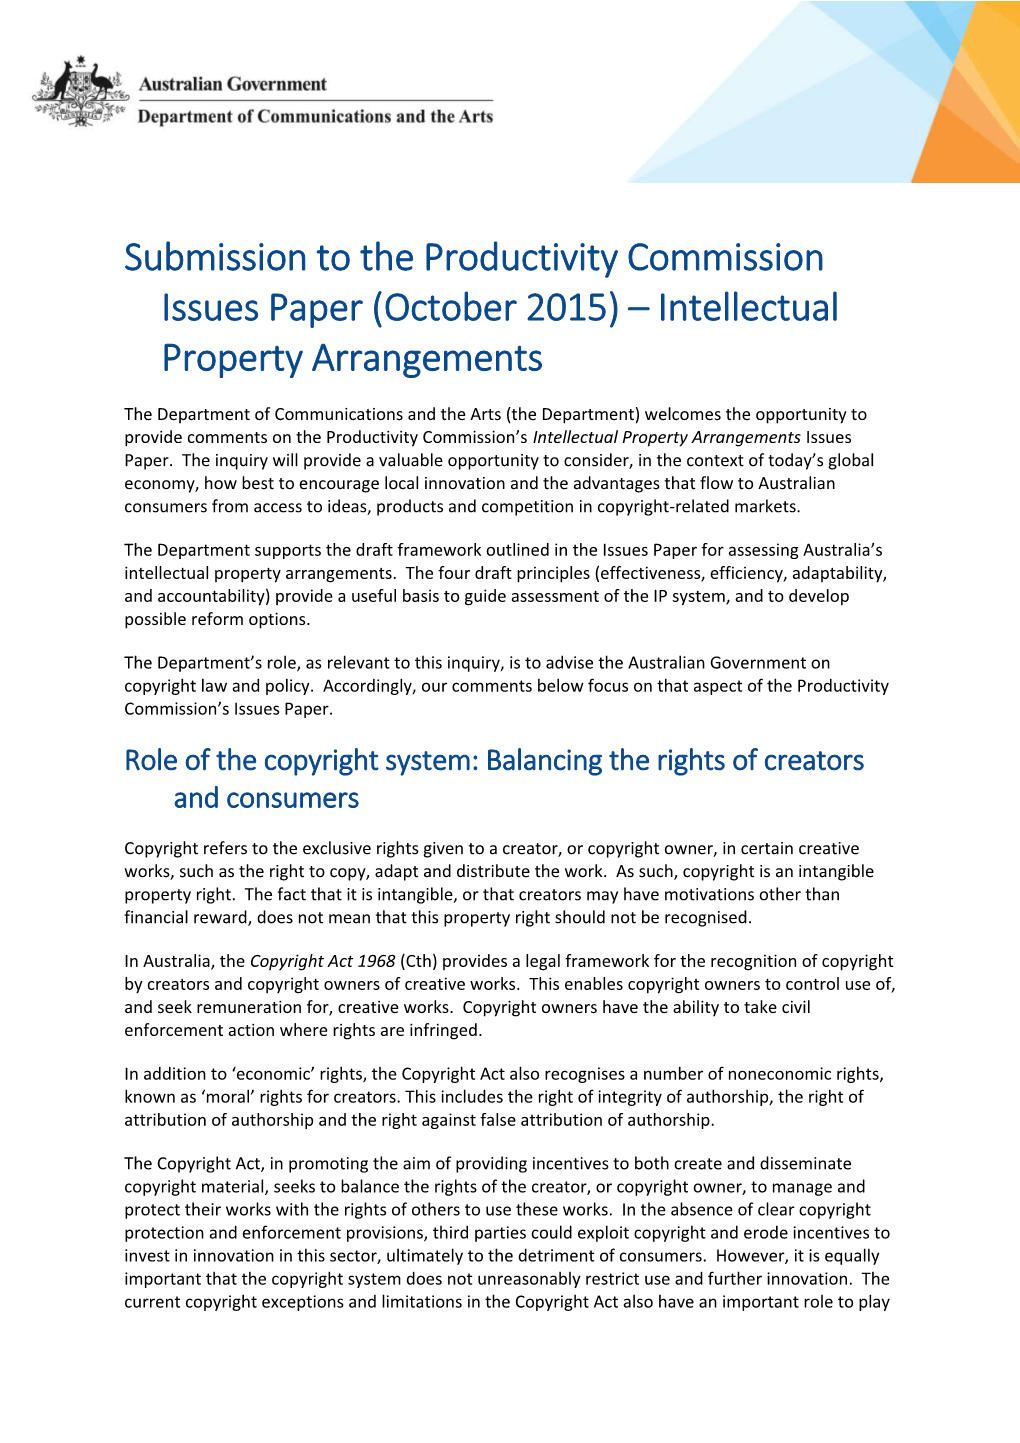 Submission DR154 - Department of Communications and the Arts - Department of Communications